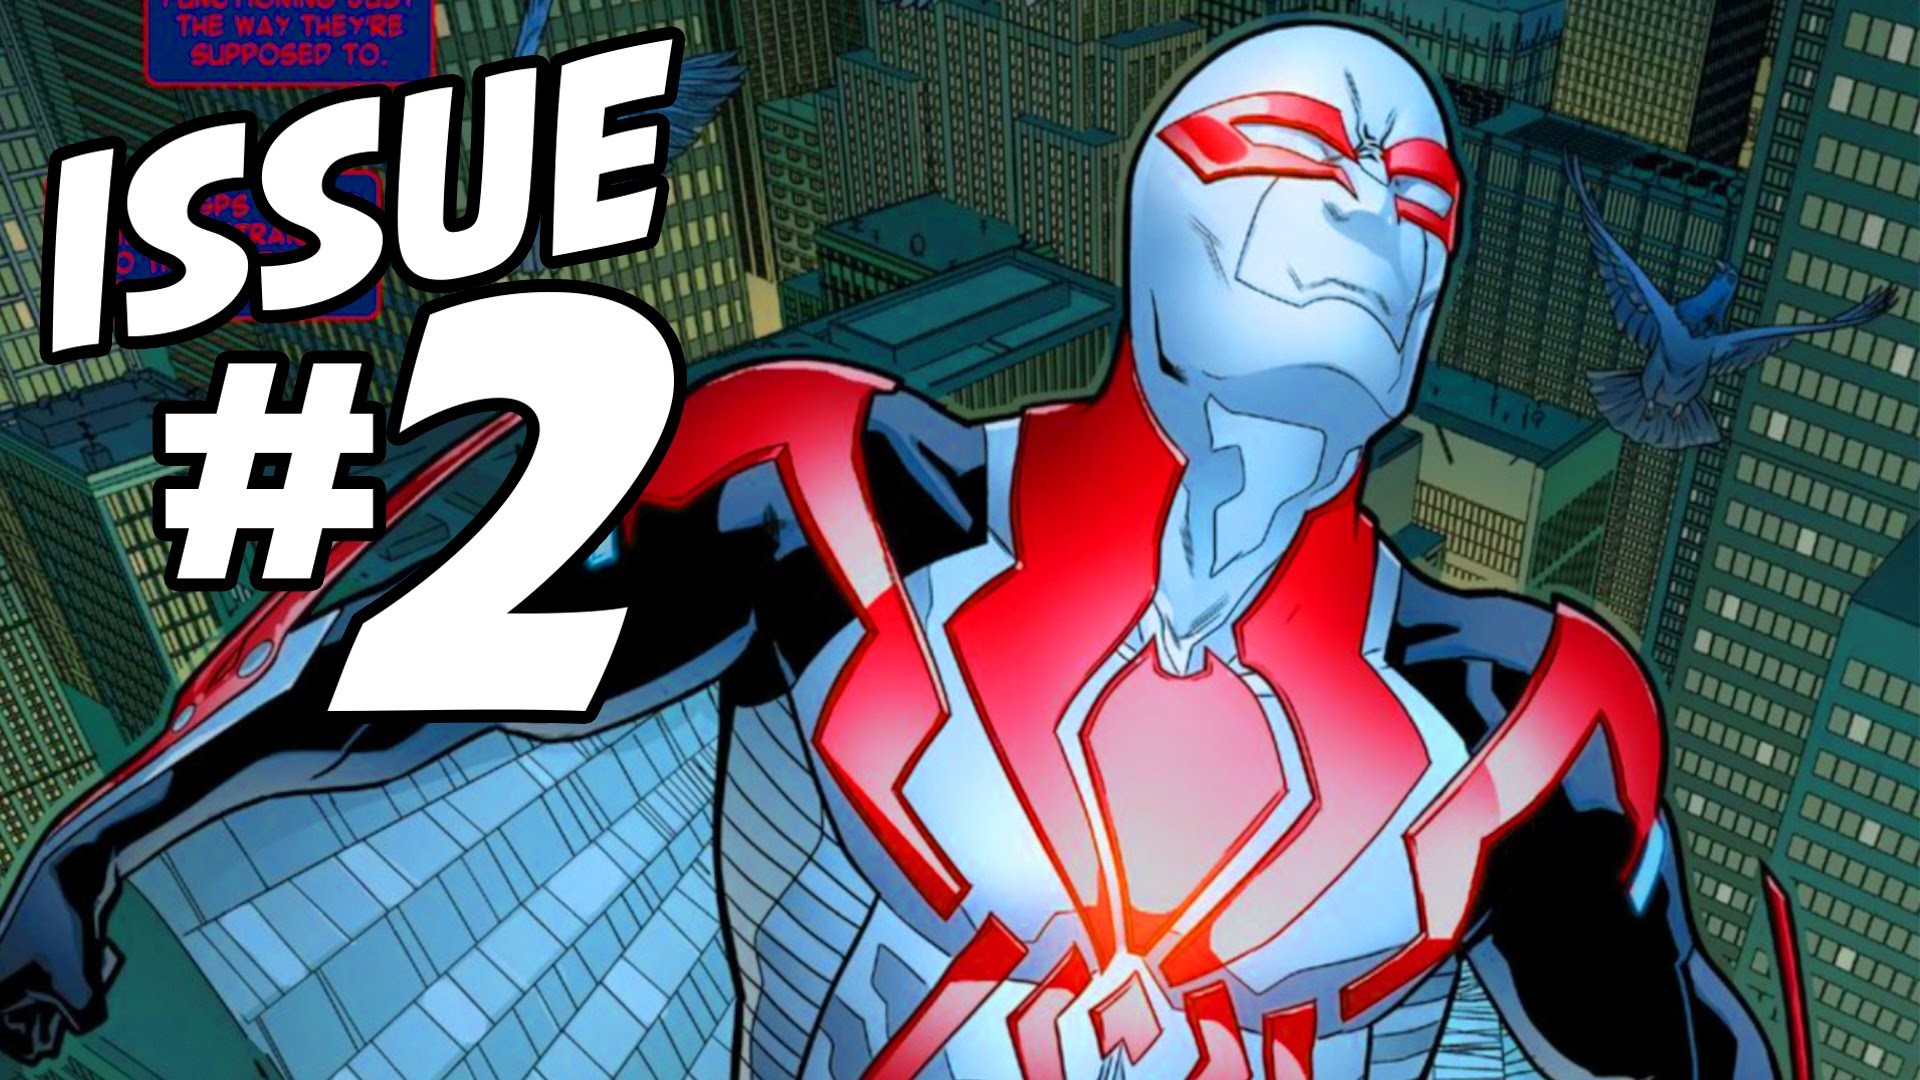 1920x1080 Spider-Man 2099 (All-New All-Different) Issue #2 Full Comic Review! (2015)  - YouTube